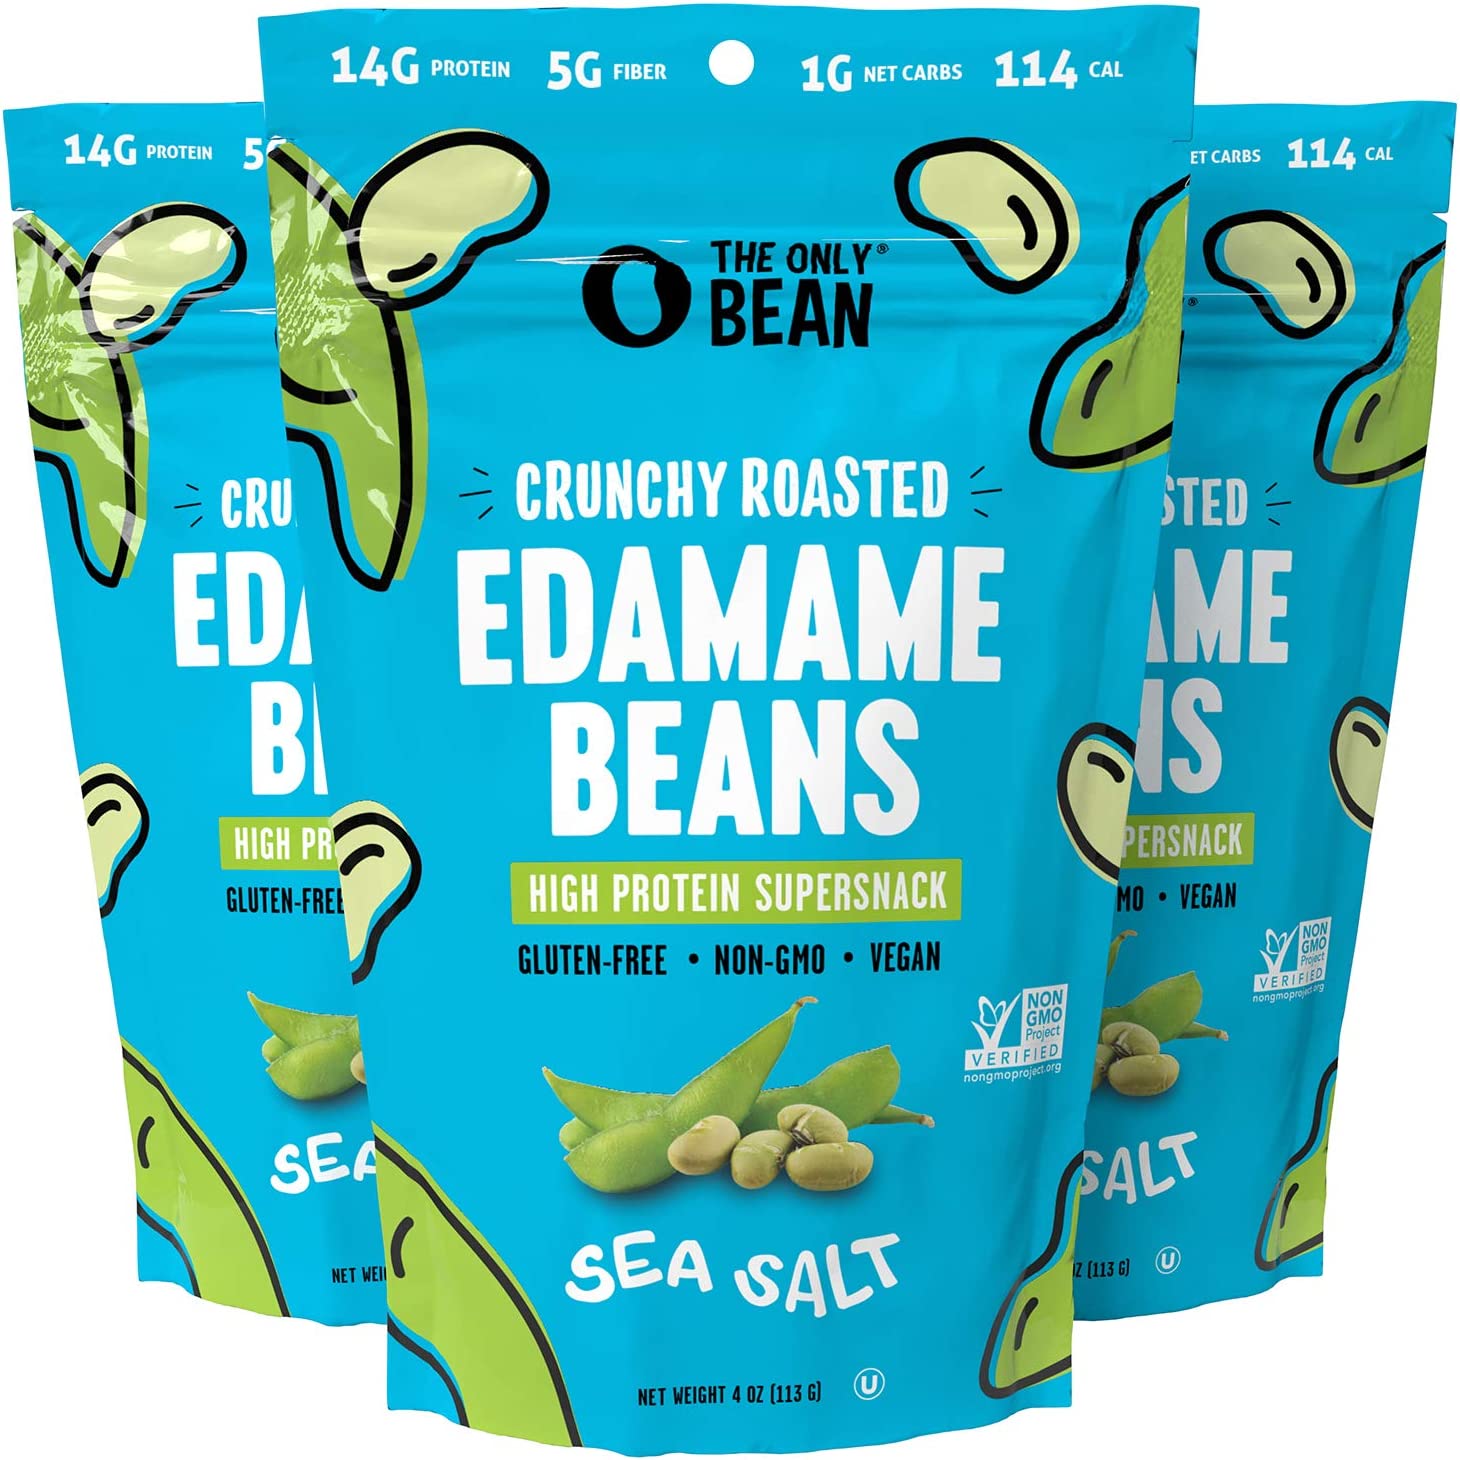 The Only Bean – Crunchy Roasted Edamame Beans (Sea Salt) – Keto Snacks (2g Net) – High Protein Healthy Snacks (14g Protein) – Low Carb & Calorie, Gluten-Free Snack, Vegan Keto Food – 4 oz (3 Pack)